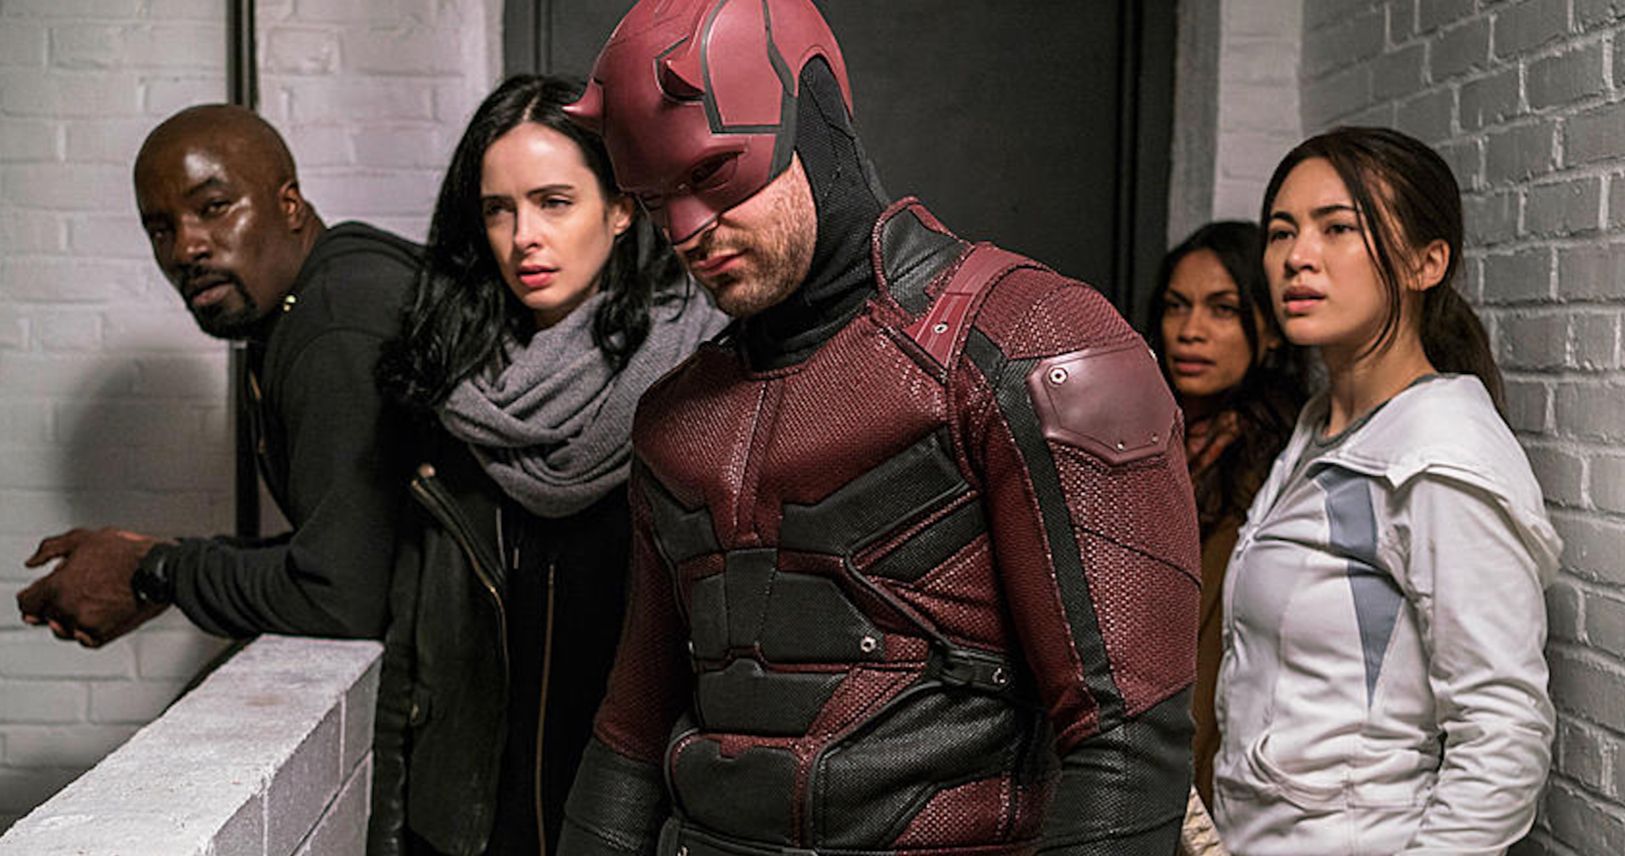 Daredevil, Punisher and Netflix's Defenders Are on the Board at Marvel Says Kevin Feige